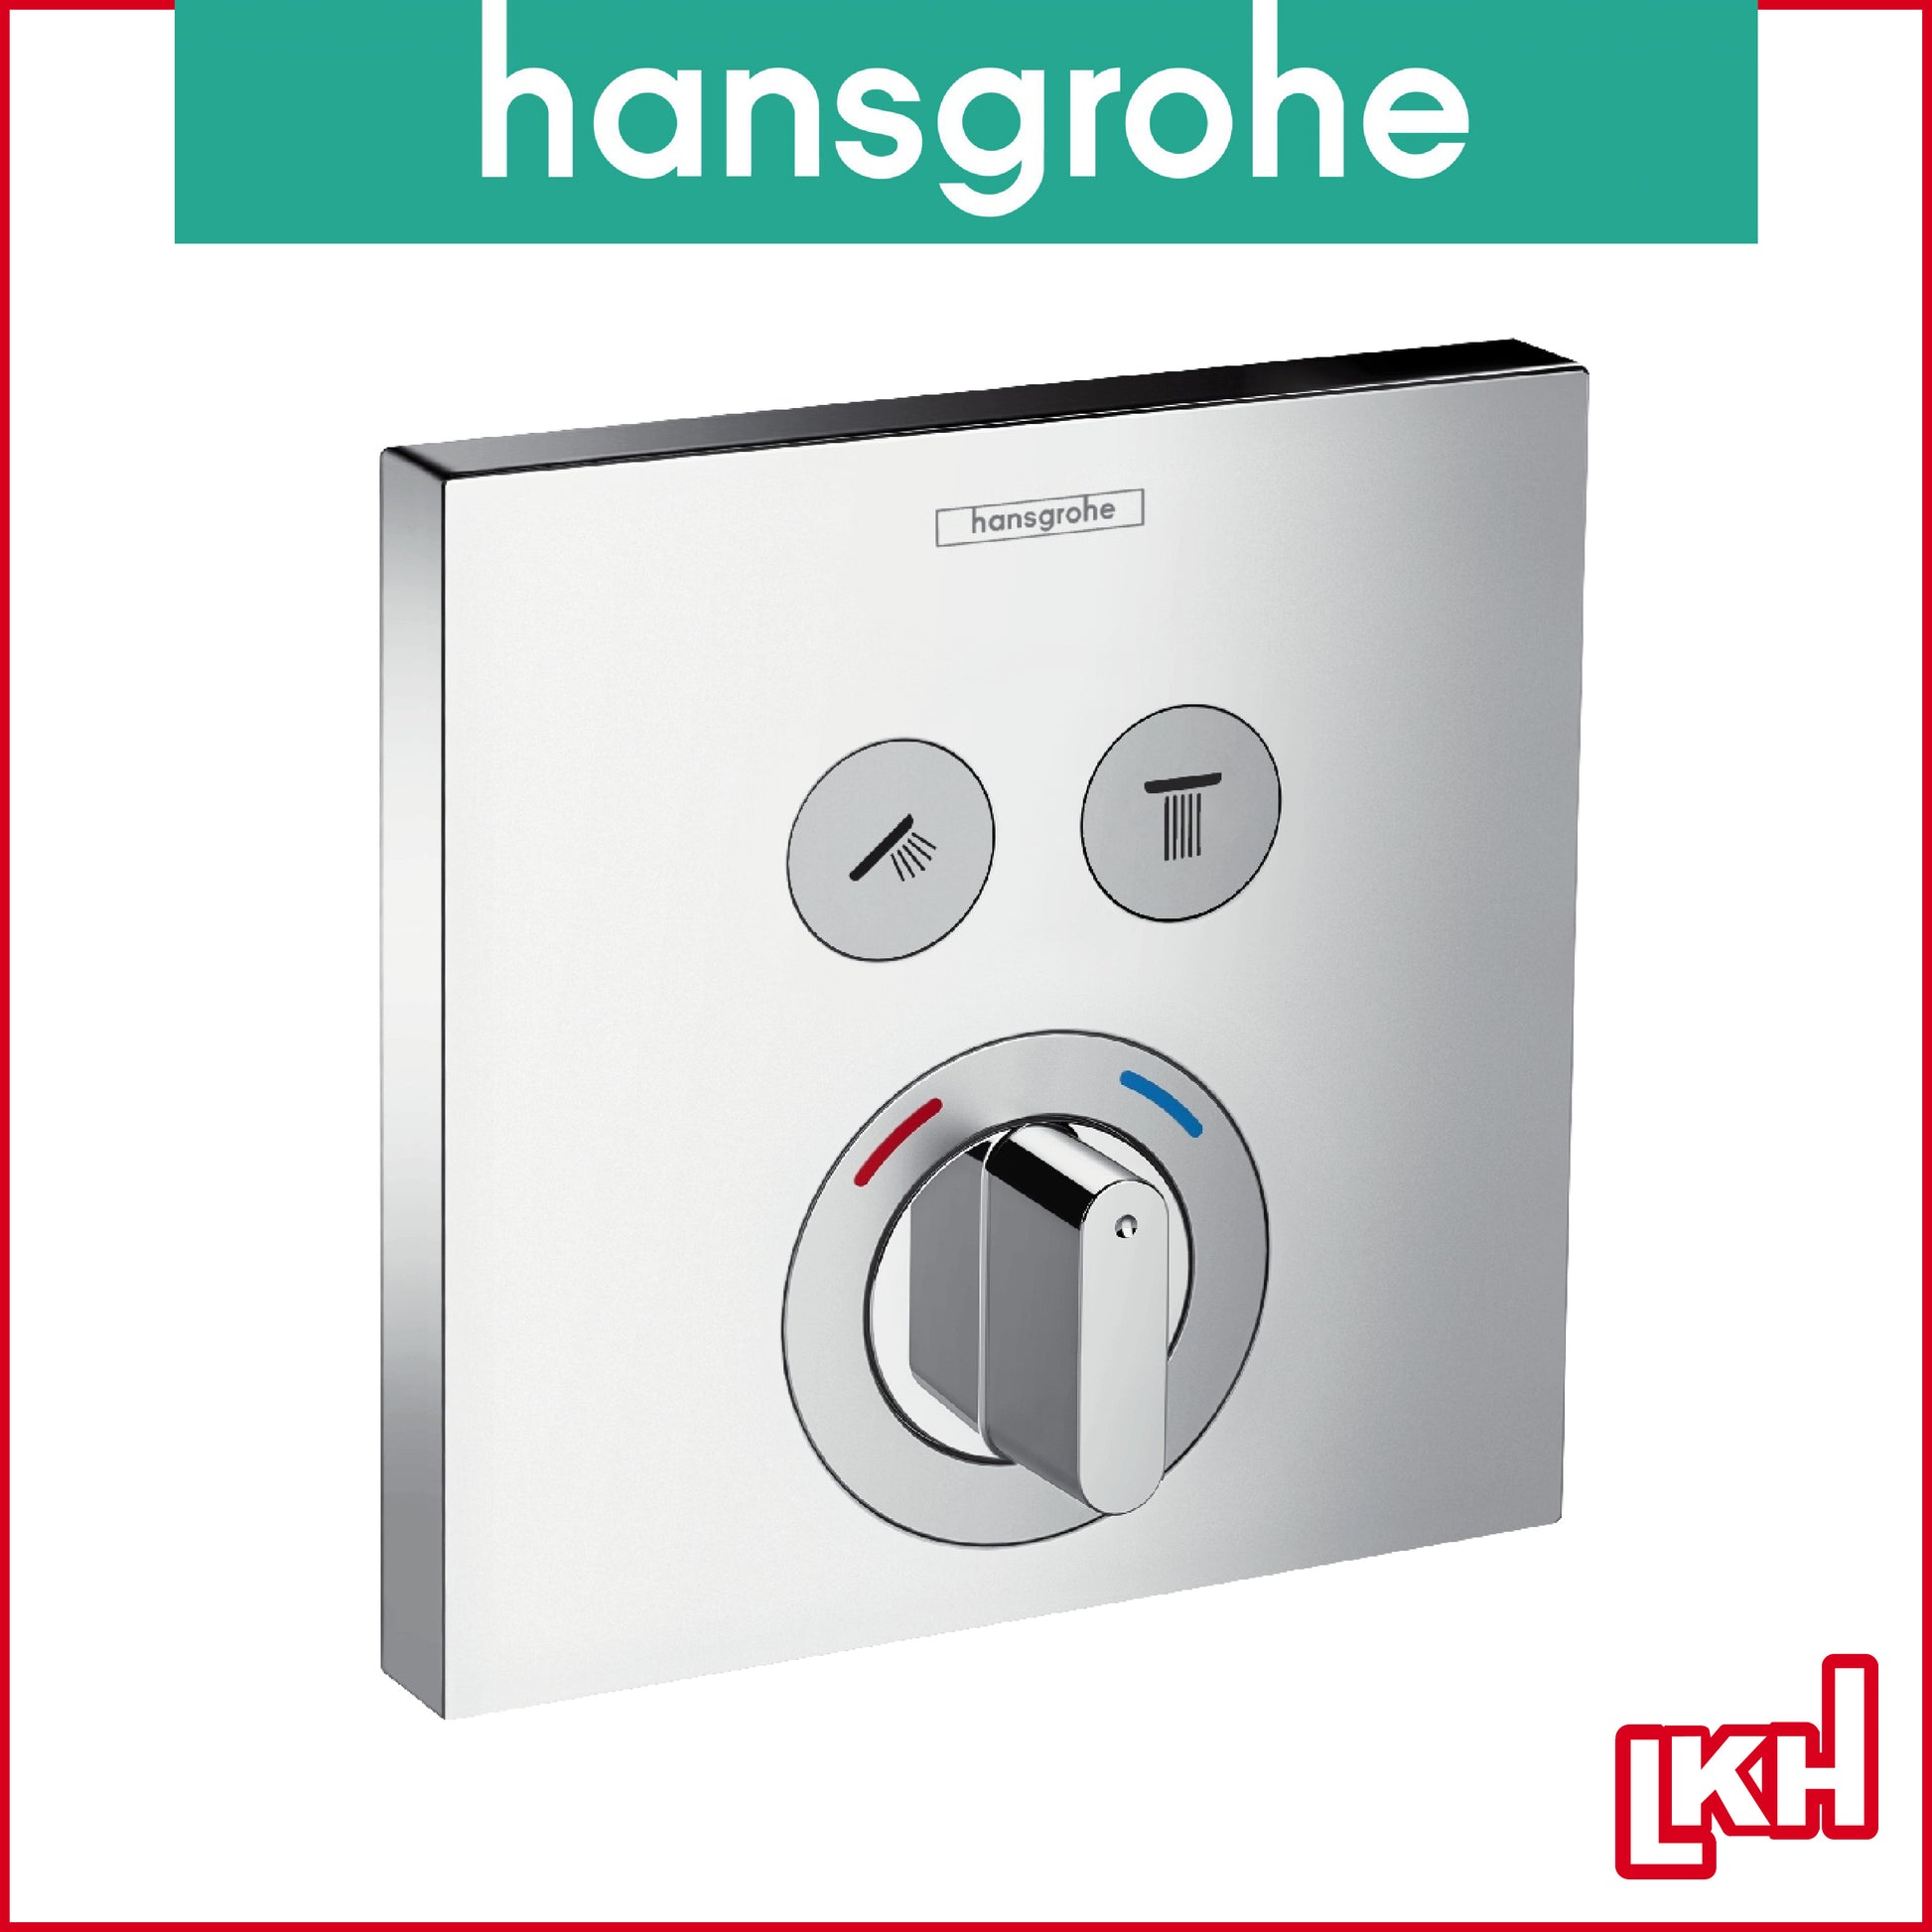 hansgrohe 15768000 select concealed bath mixer plate